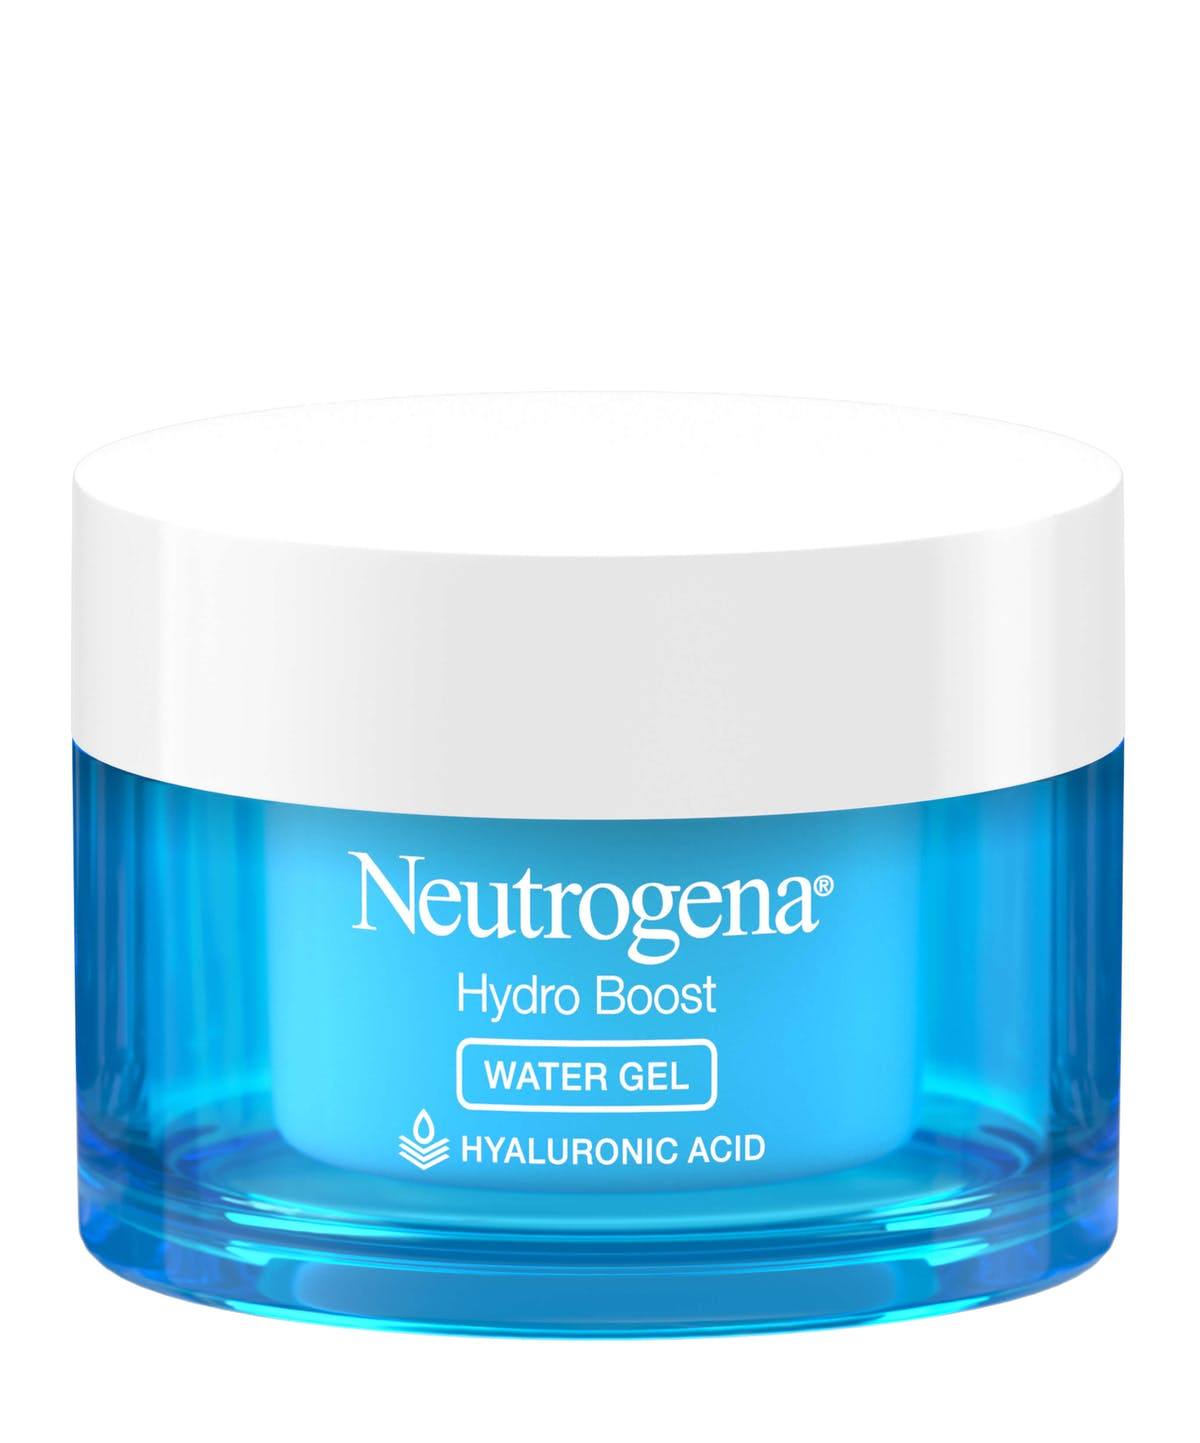 Neutrogena Hydro Boost Water Gel is dermatologist recommended. Skincare routine for oily skin - Shop Journey